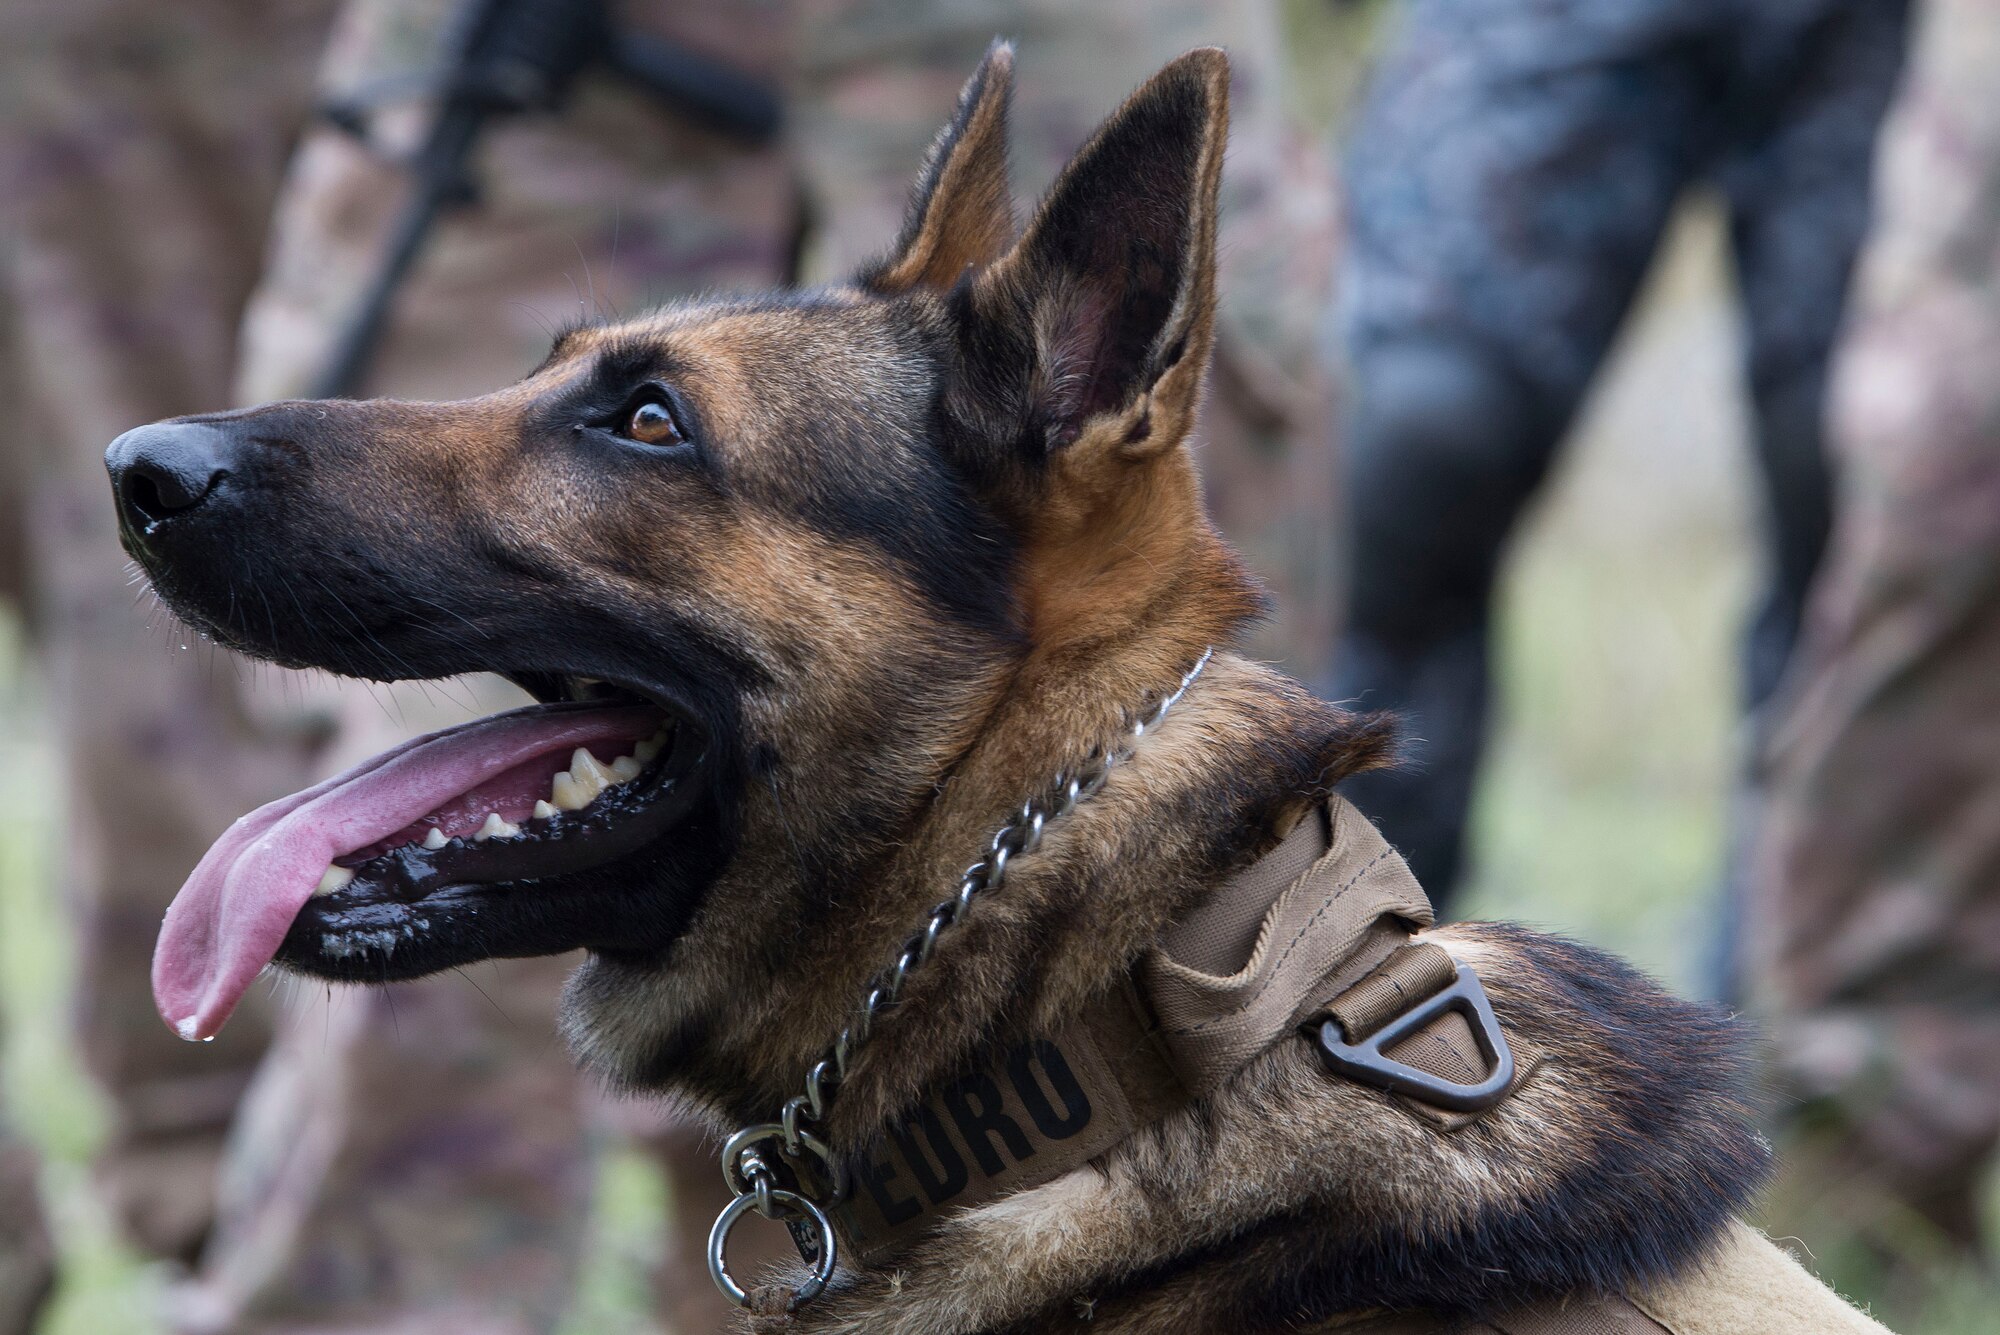 U.S. Air Force Military Working Dog (MWD) Pedro takes a break following a demonstration of his capabilities during Pacific Defender 20-1 at the Pacific Regional Training Center near Andersen Air Force Base, Guam, Feb. 10, 2020.